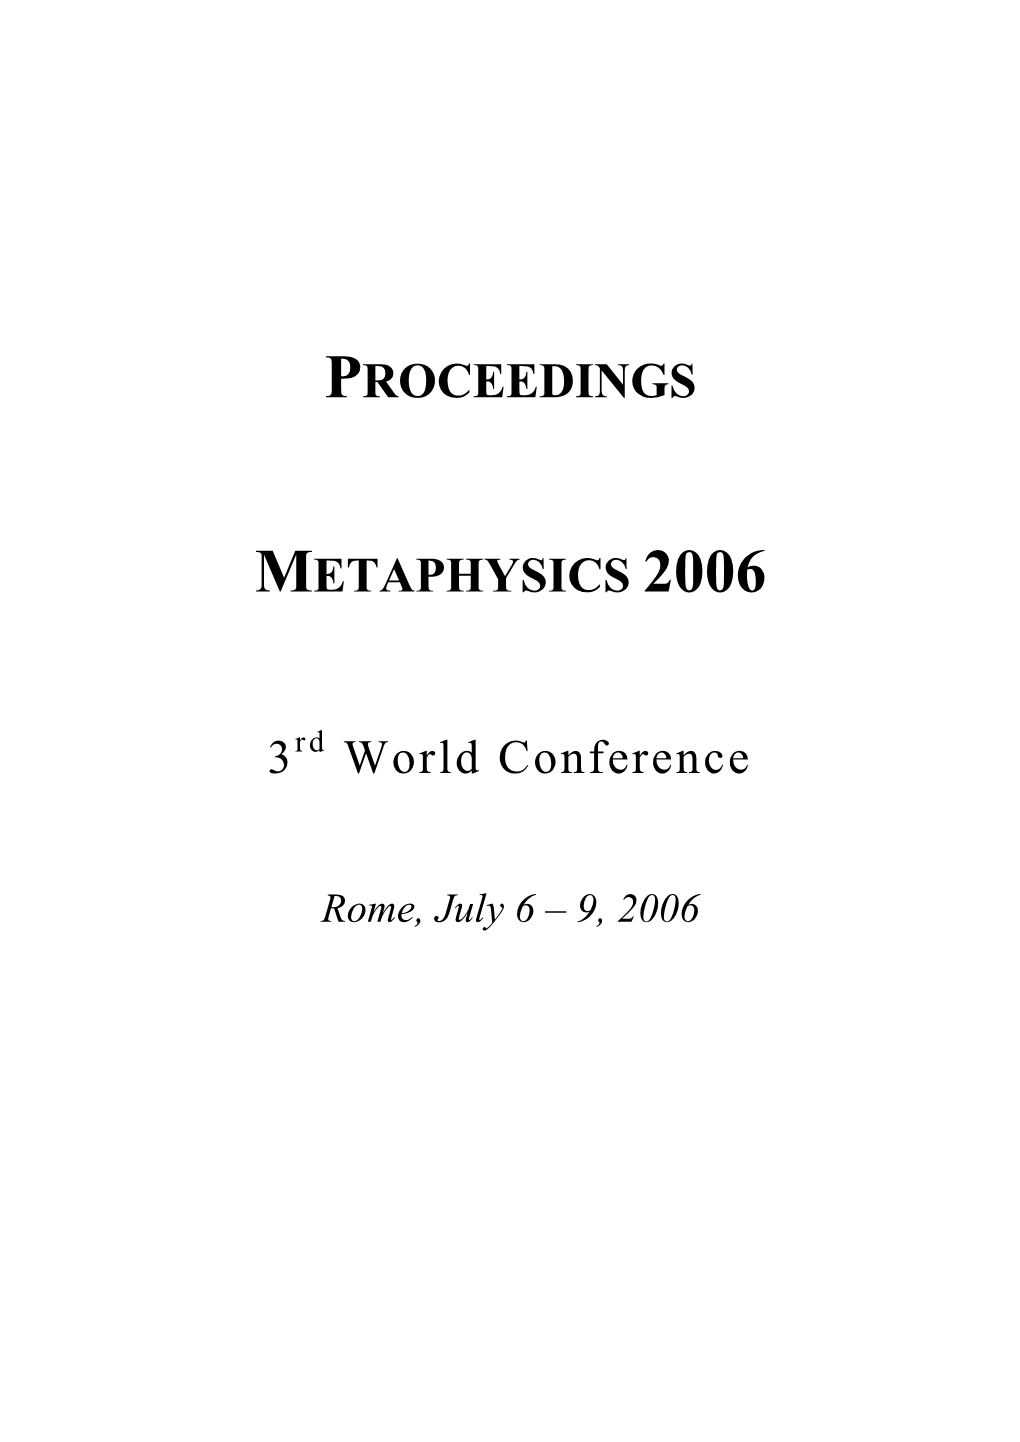 PROCEEDINGS METAPHYSICS 2006 3Rd World Conference (Rome, July 6 – 9, 2006)